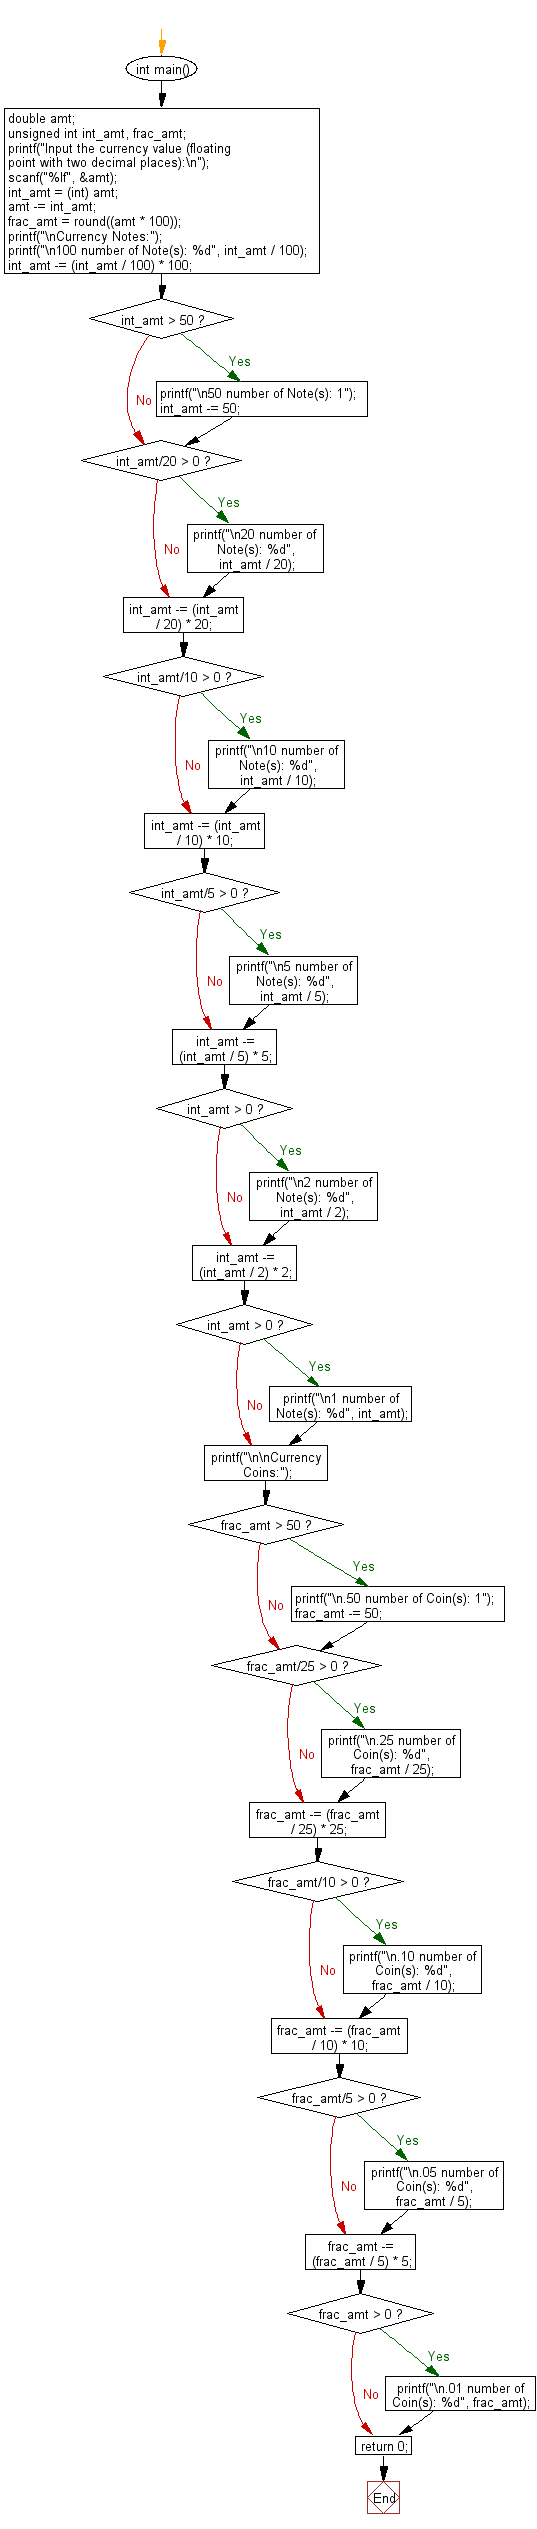 C Programming Flowchart: Convert a given amount to possible number of notes and coins.